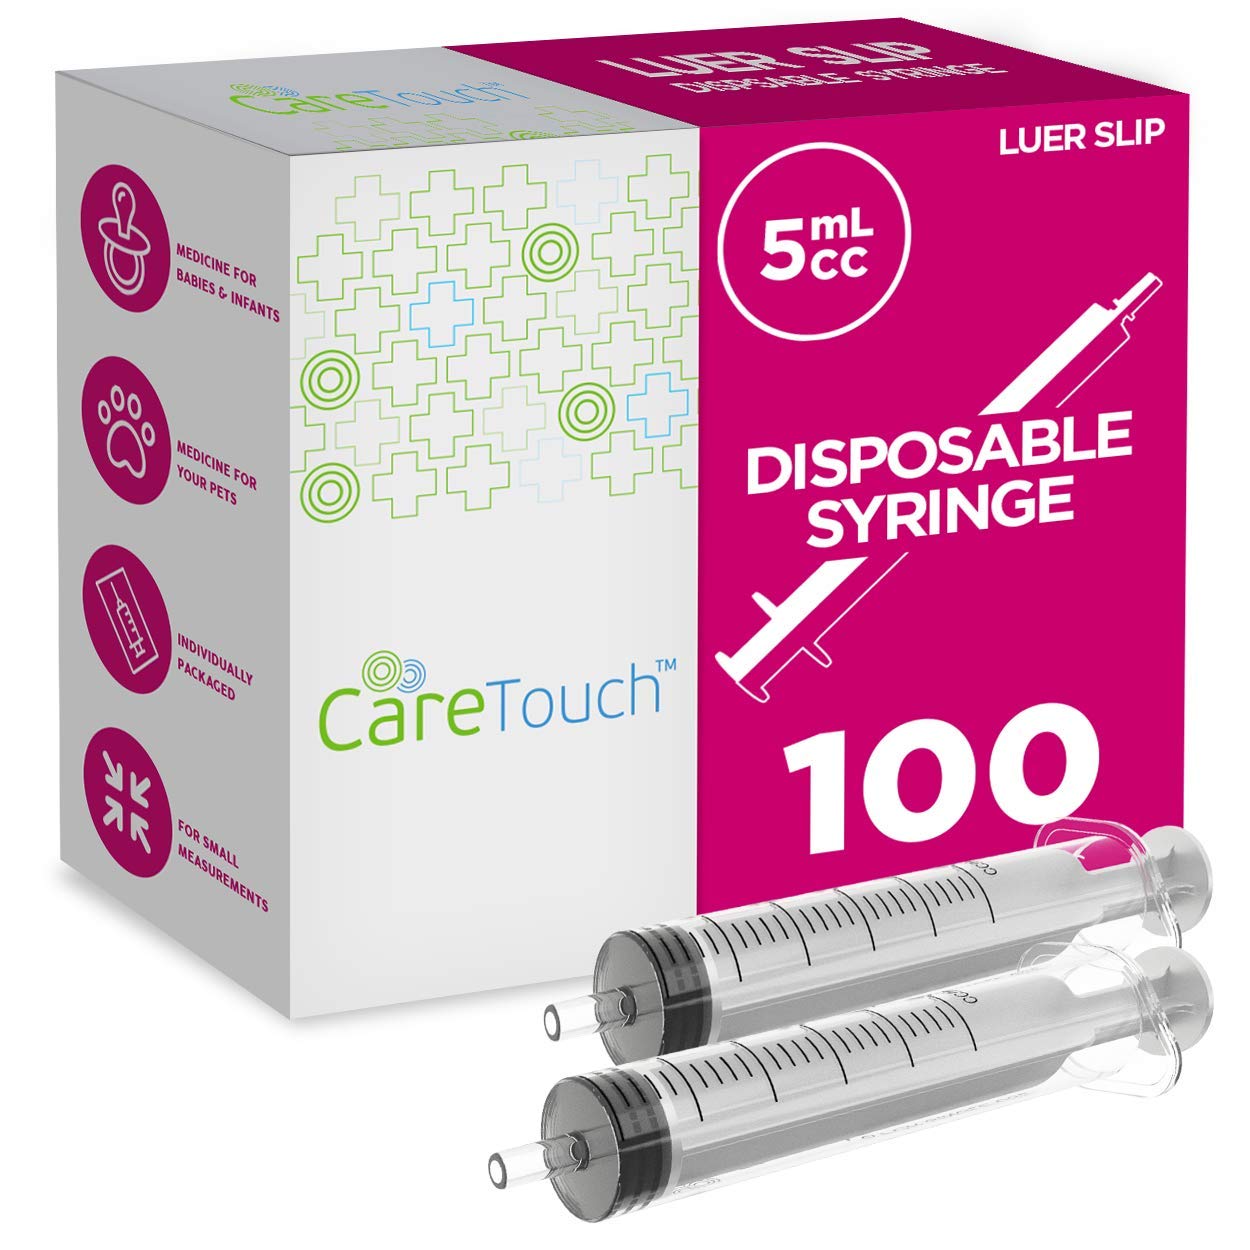 Care Touch Syringe with Luer Slip Tip - 5ml 100 Sterile Syringes (No needle) (Case of 6 units)